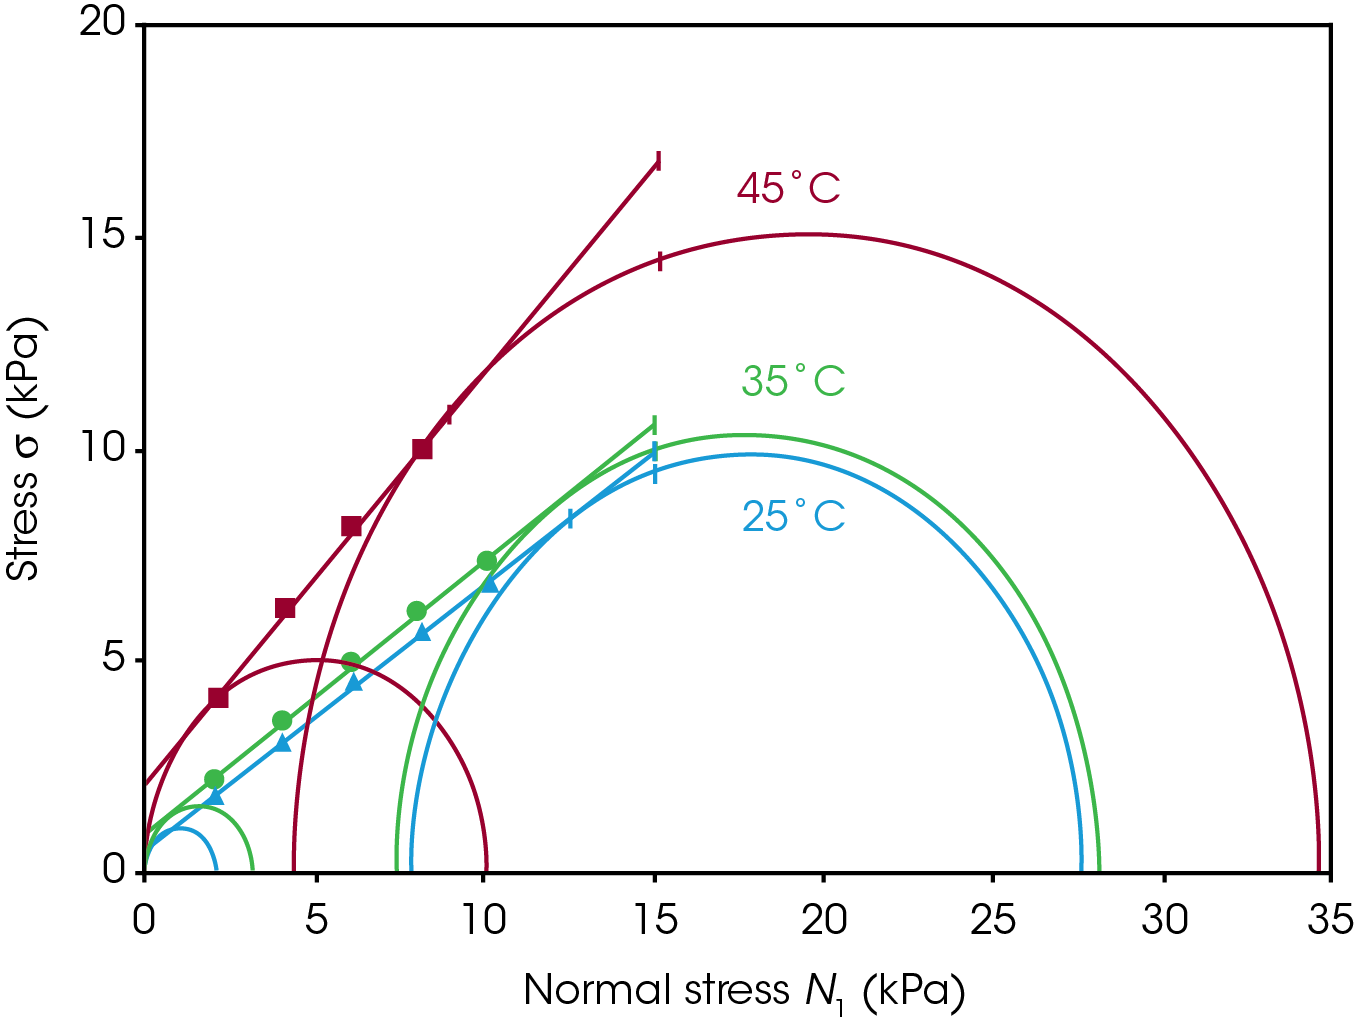 Figure 7. Isothermal temperature results for three samples tested at either 25, 35, or 45 °C.